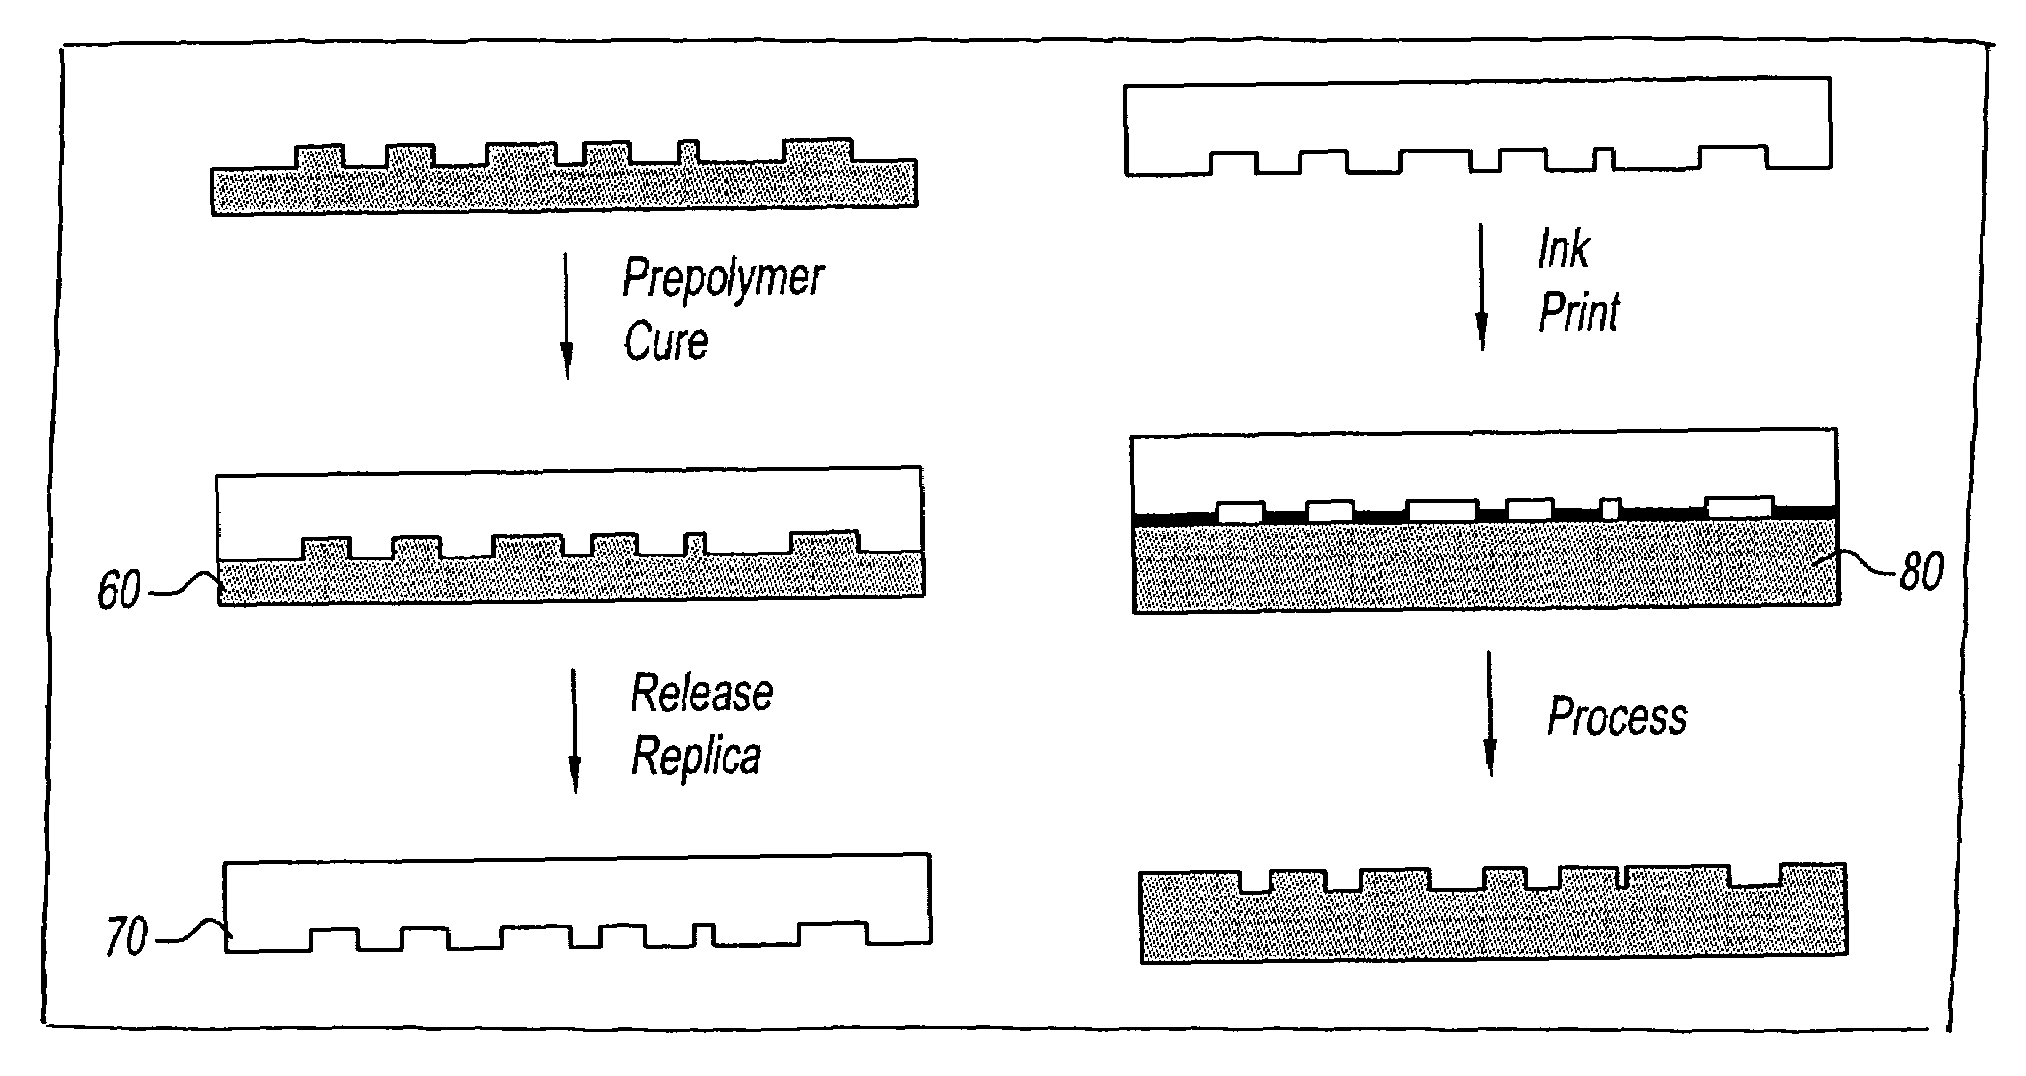 Low dielectric semiconductor device and process for fabricating the same